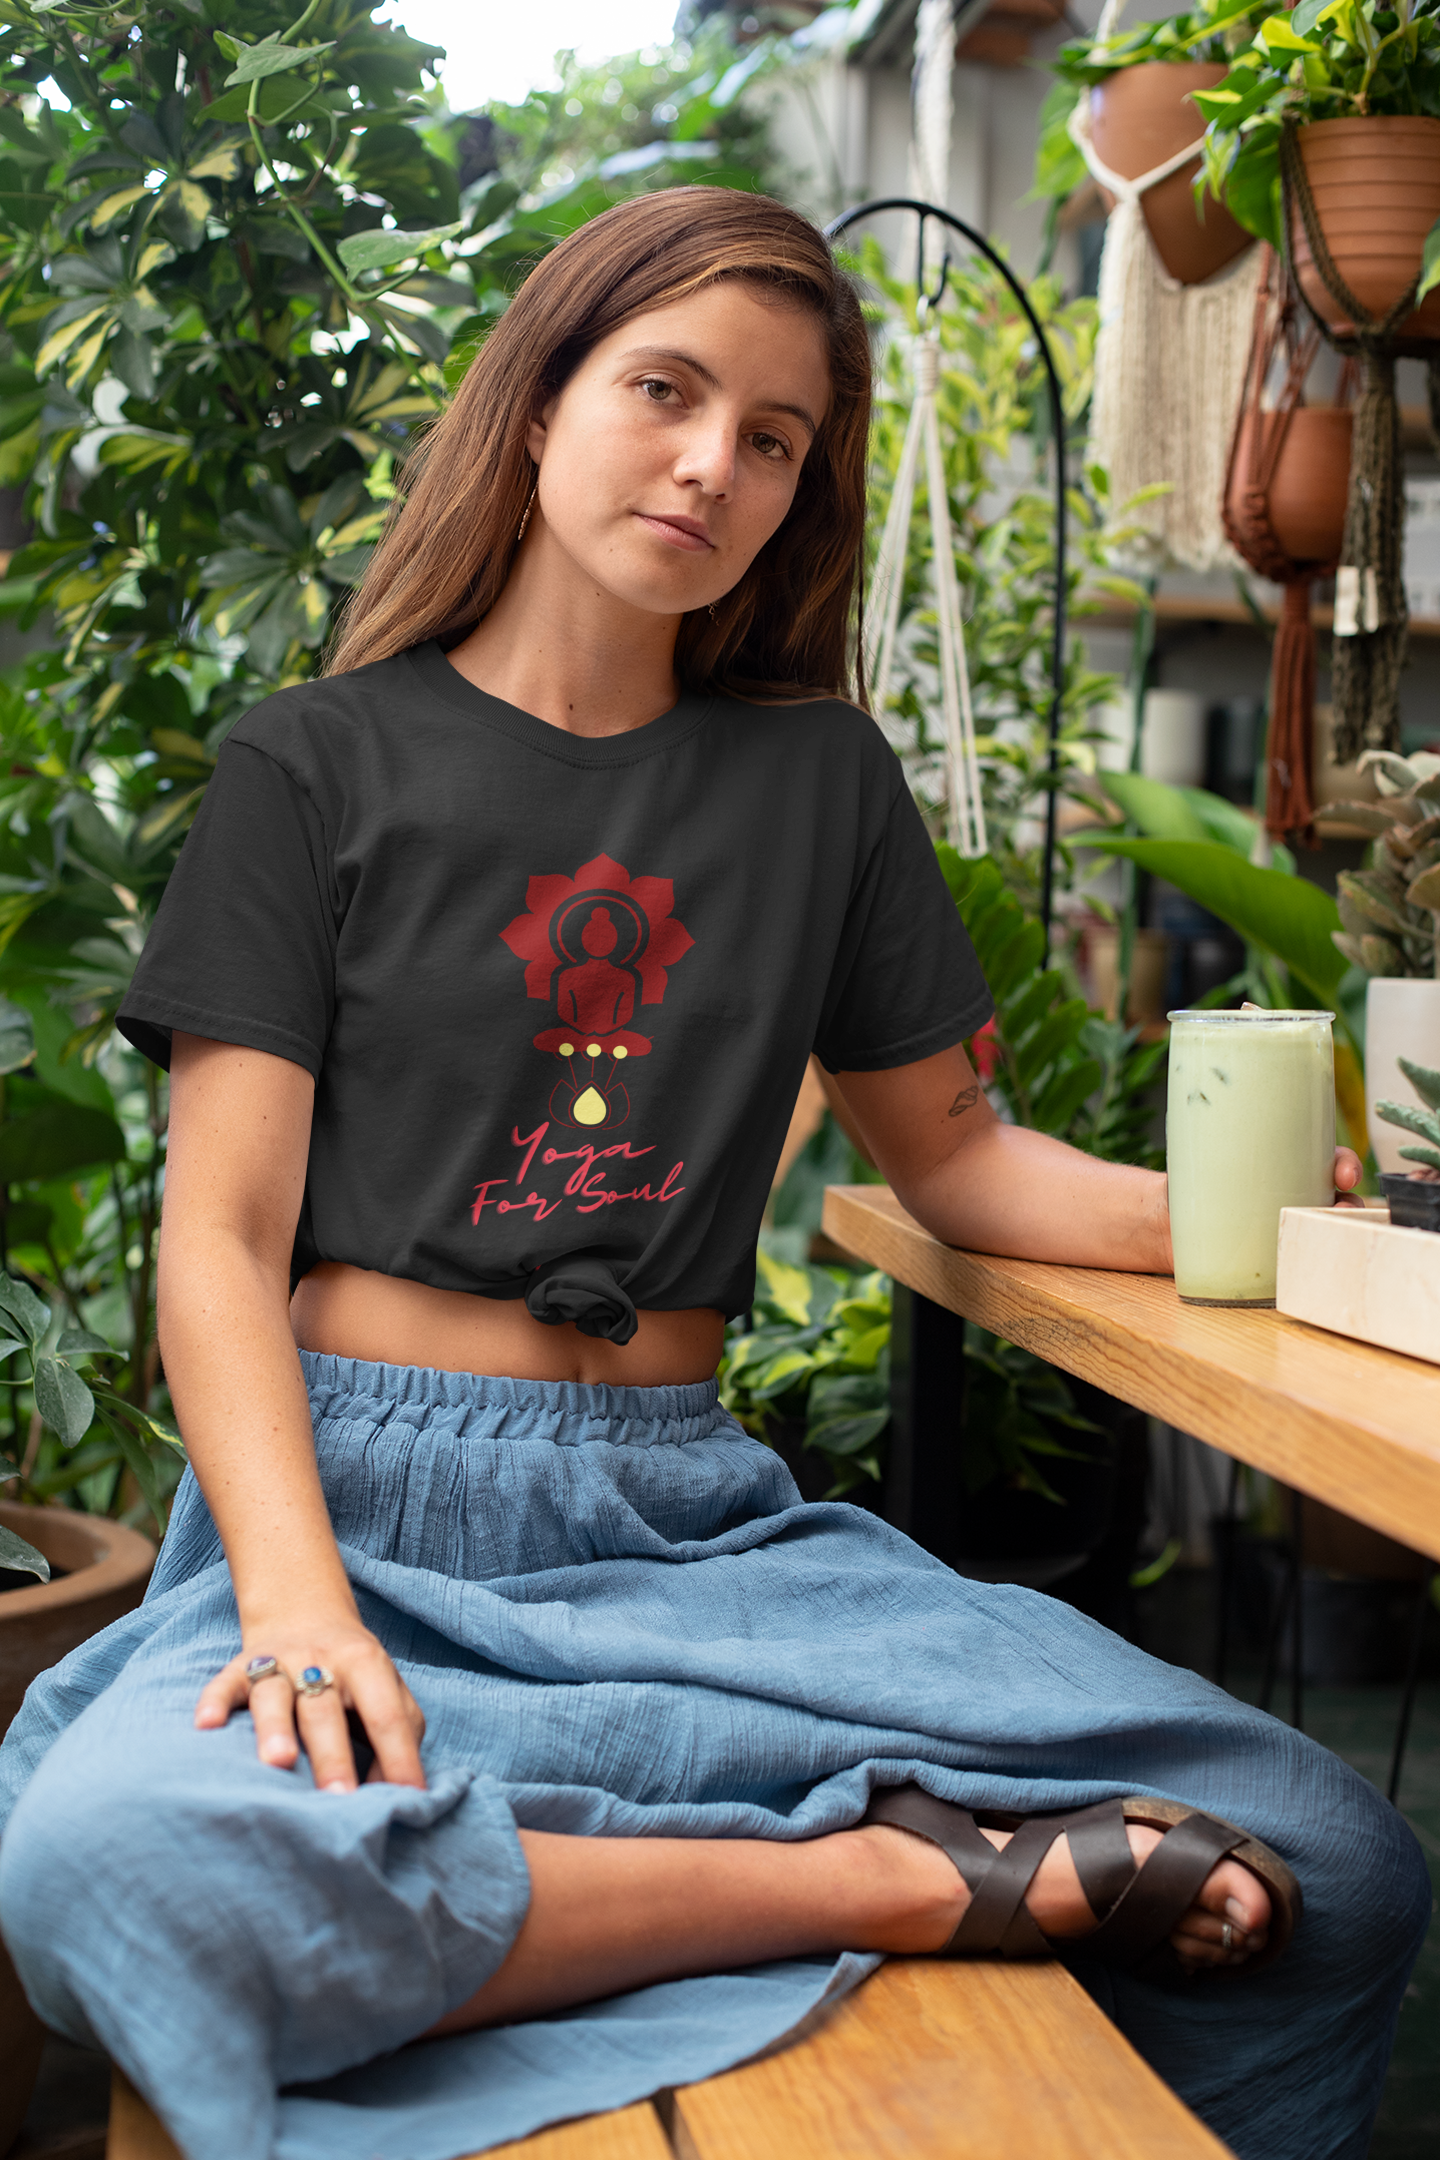 Yoga T-shirt For Women with Buddha Design Black Color